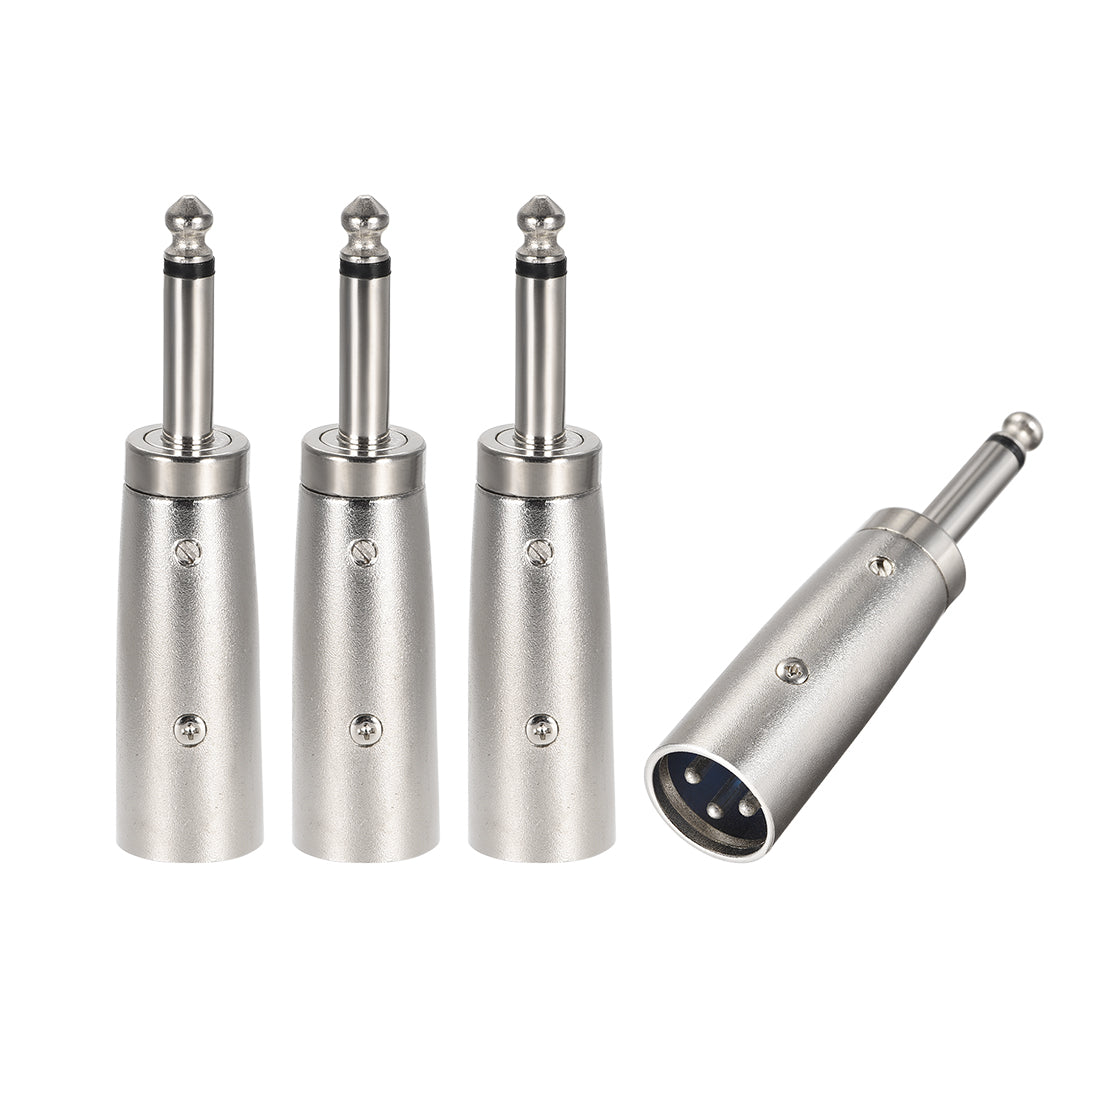 uxcell Uxcell XLR Male to 1/4" Male TRS Adapter,Gender Changer - XLR-M to 6.35mm Coupler	Adapters,Microphones Plug In Audio Connector,Mic Male Plug 4pcs